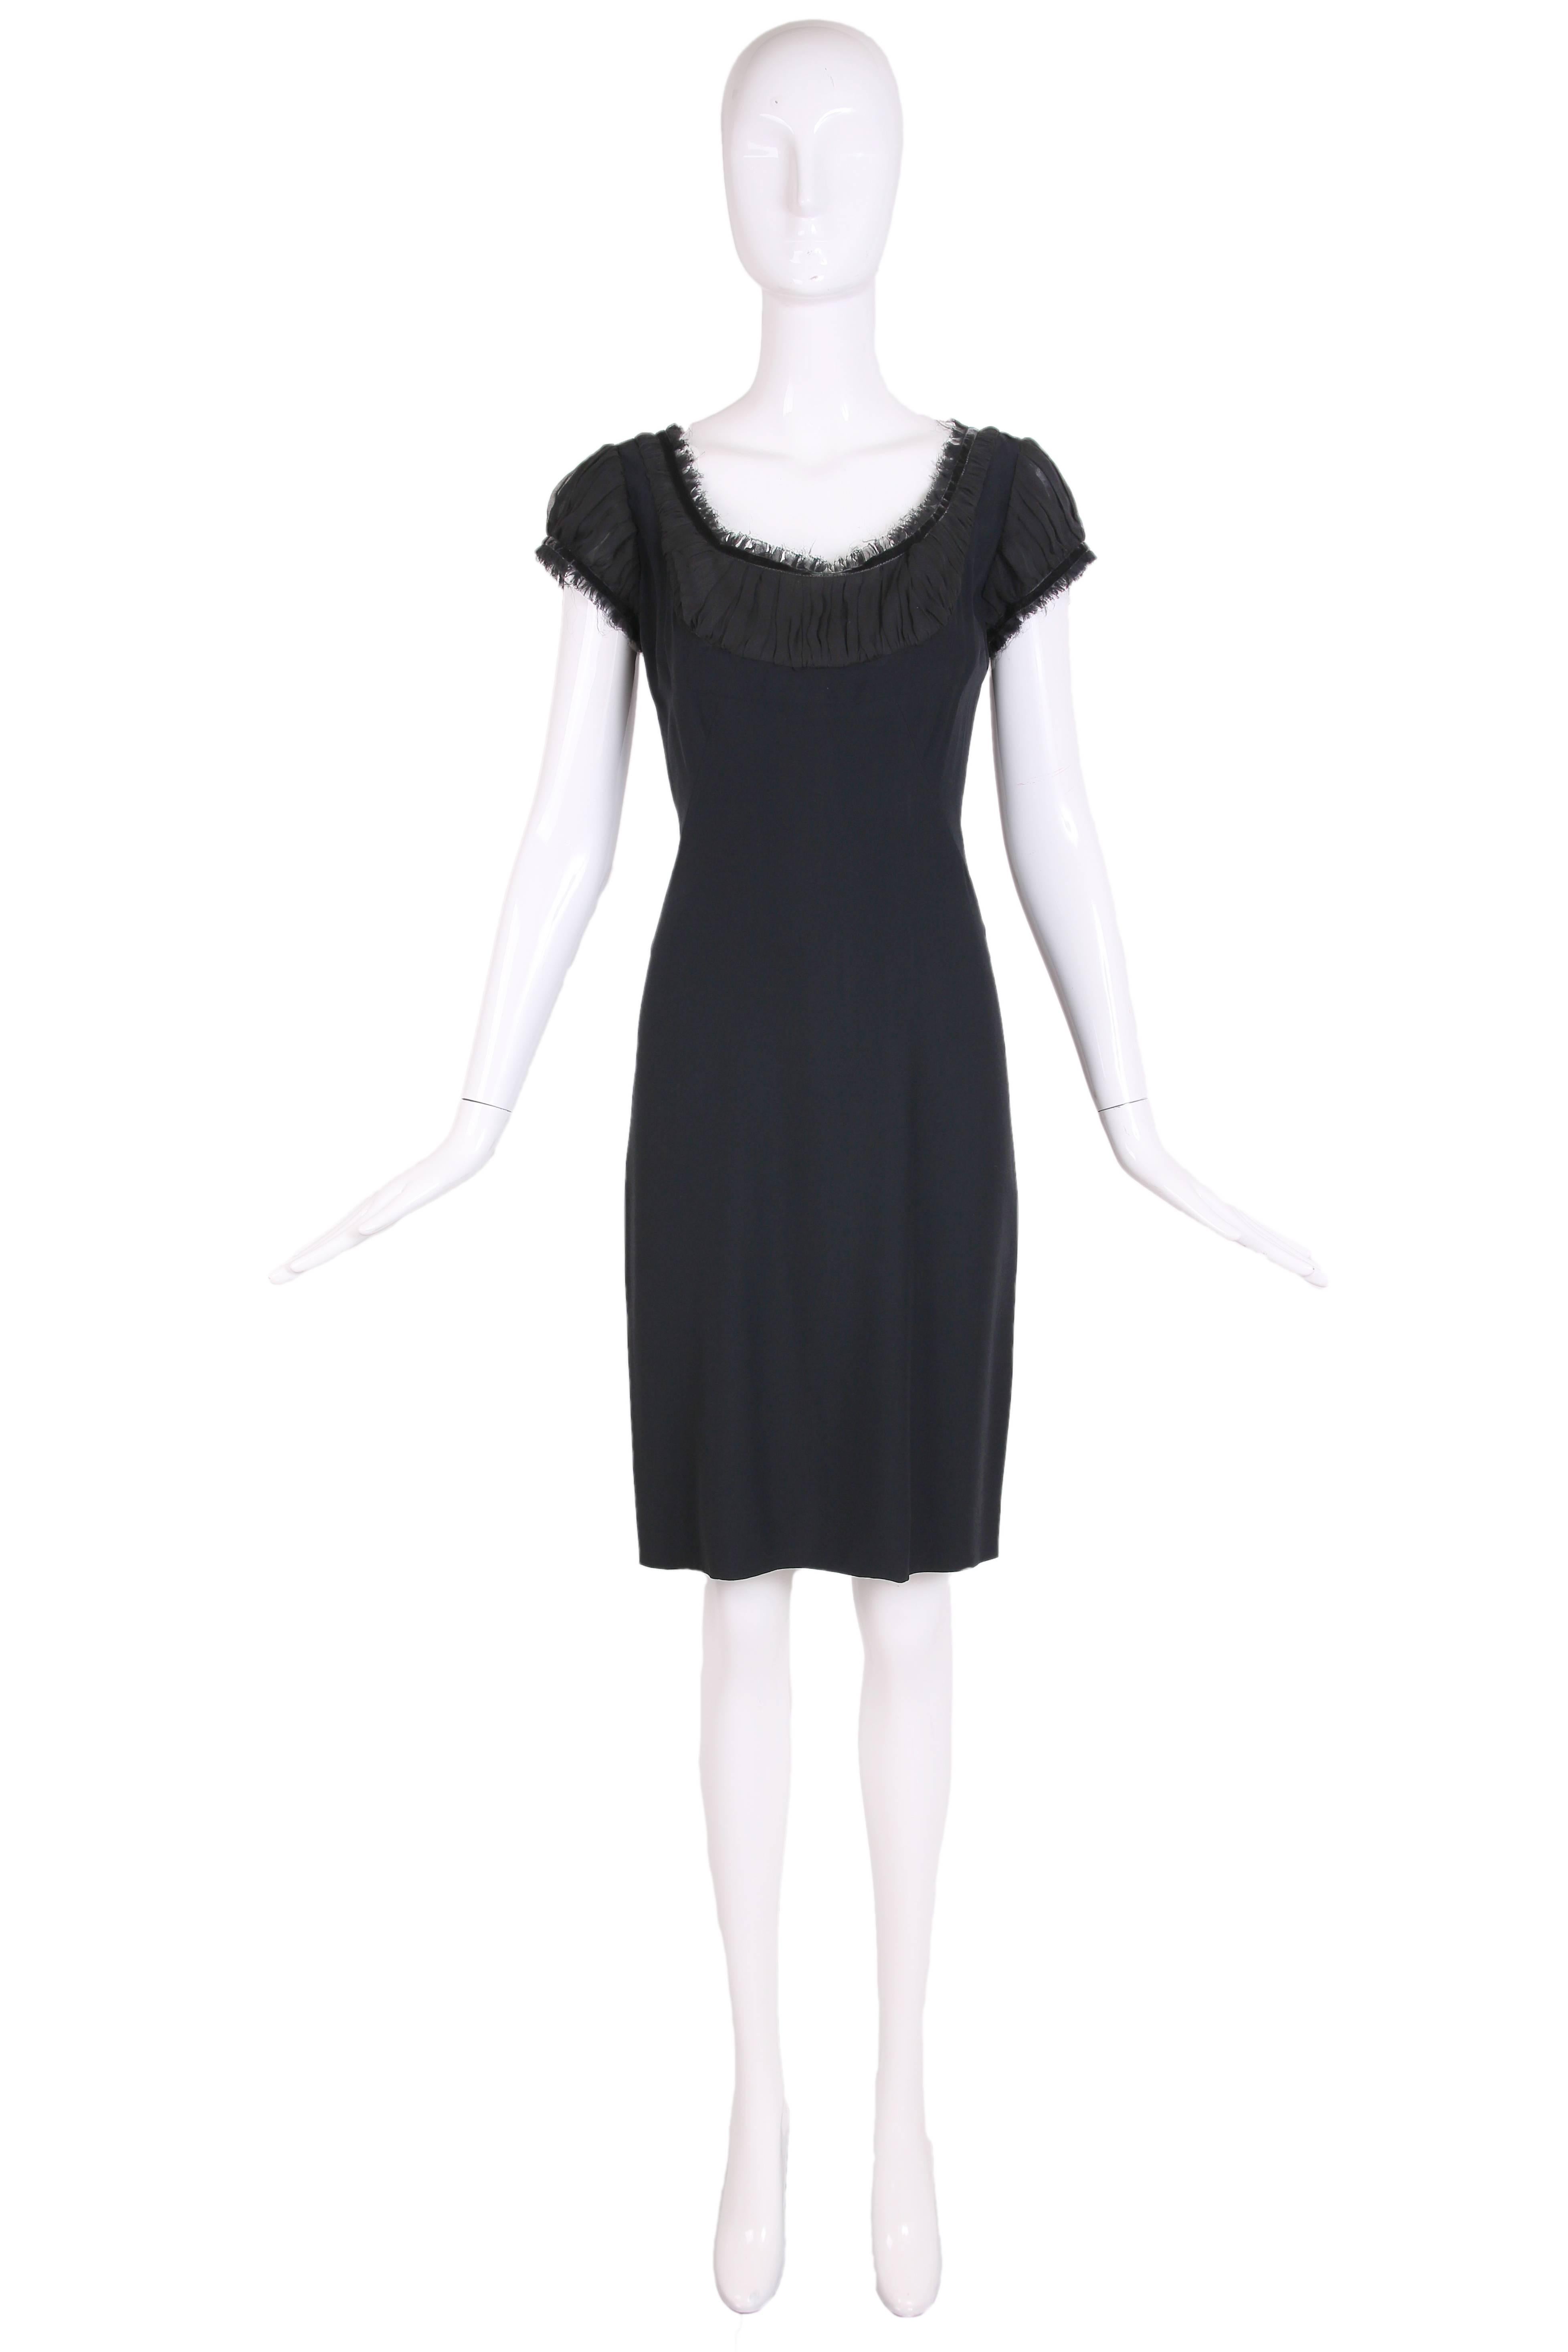 2010 Alexander McQueen black cocktail dress with ruching and velvet trim at neckline. Size 40. In excellent condition.
MEASUREMENTS:
Bust - 34"
Waist - 27"
Hip - 36"
Length - 38"
Shoulder - 14"
Sleeve - 5.5"